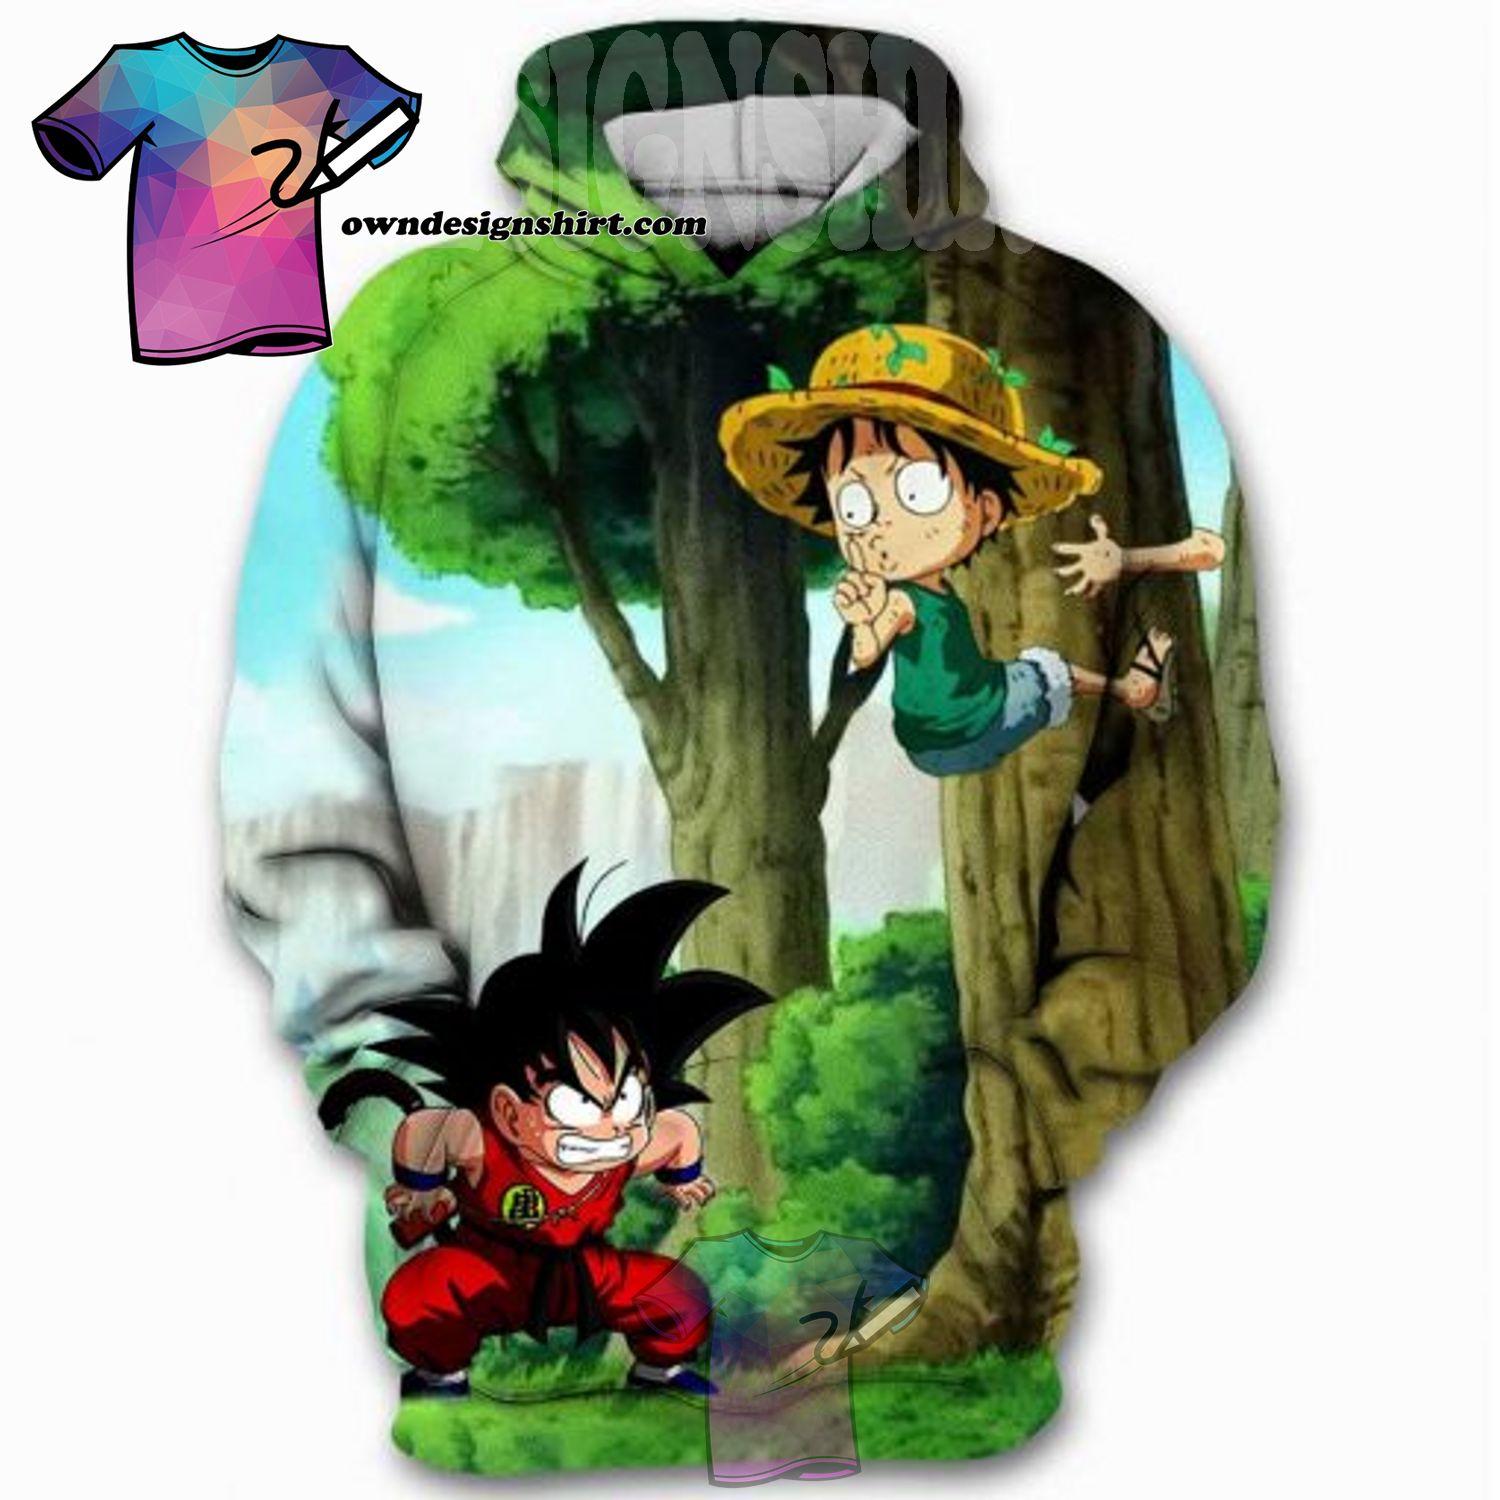 Dragon Water 3D Zip HOODIE All Over Print Mother Day Gift Best Price US Size